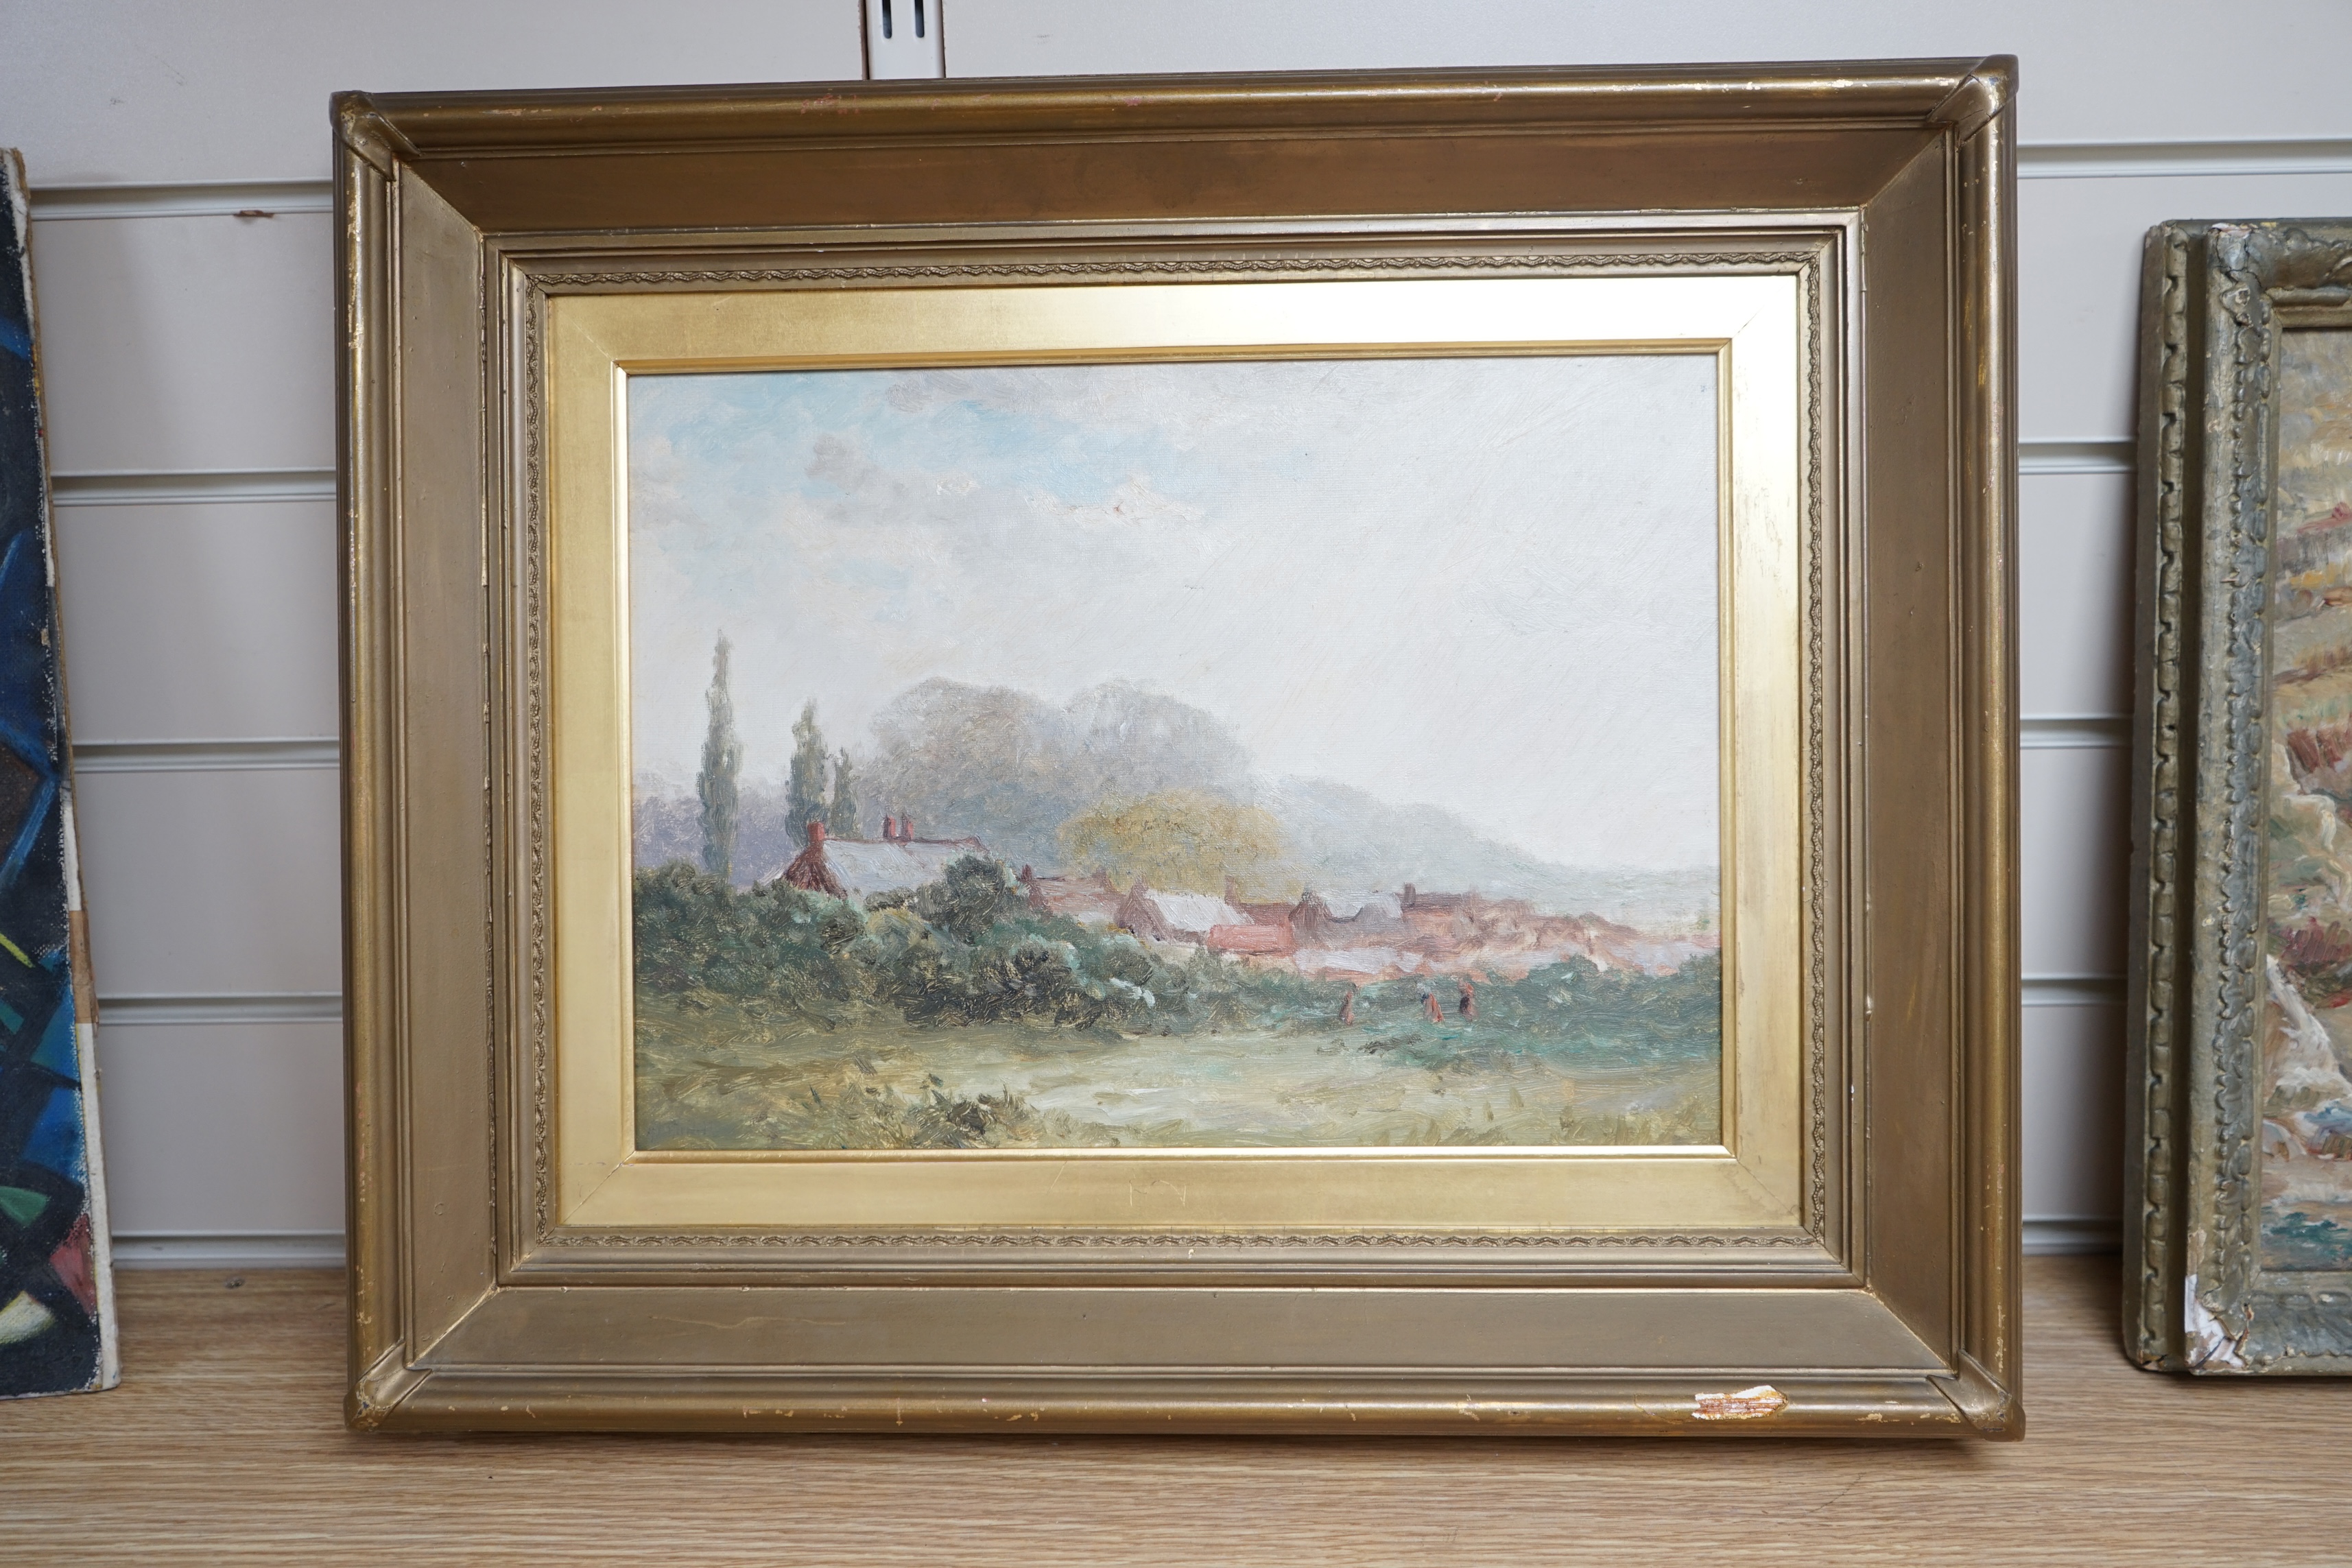 Late 19th century, English school, oil on canvas, View of a village across fields, unsigned, 26 x 36cm, gilt framed. Condition - fair to good